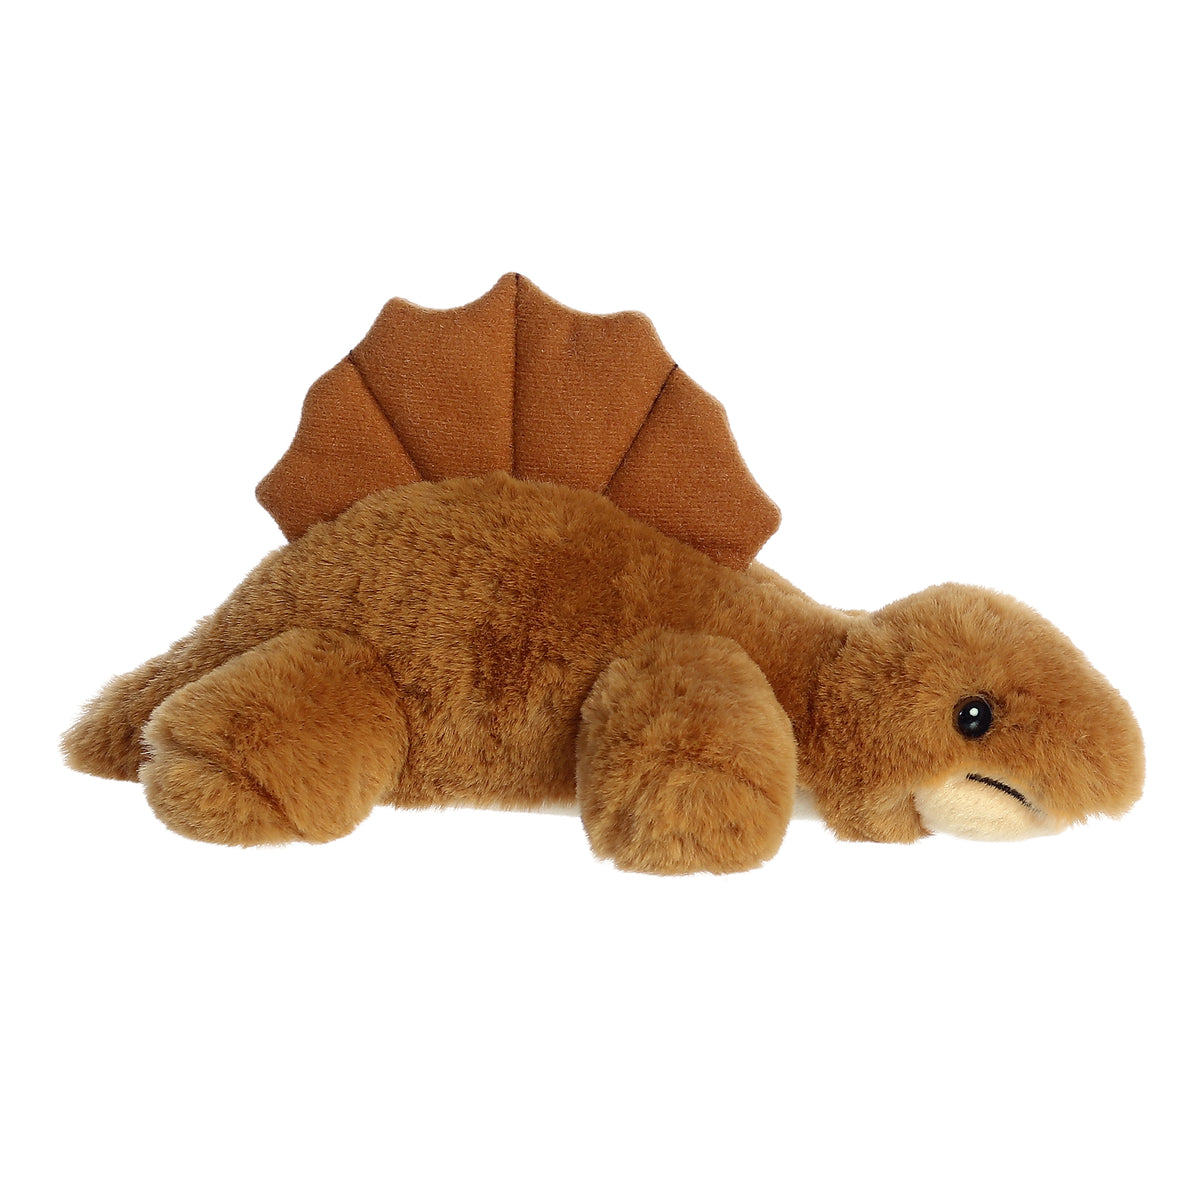 Cozy Edaphosaurus dino plushie with a plopped down brown body, ready for endless fun, and a distinct caramel fin